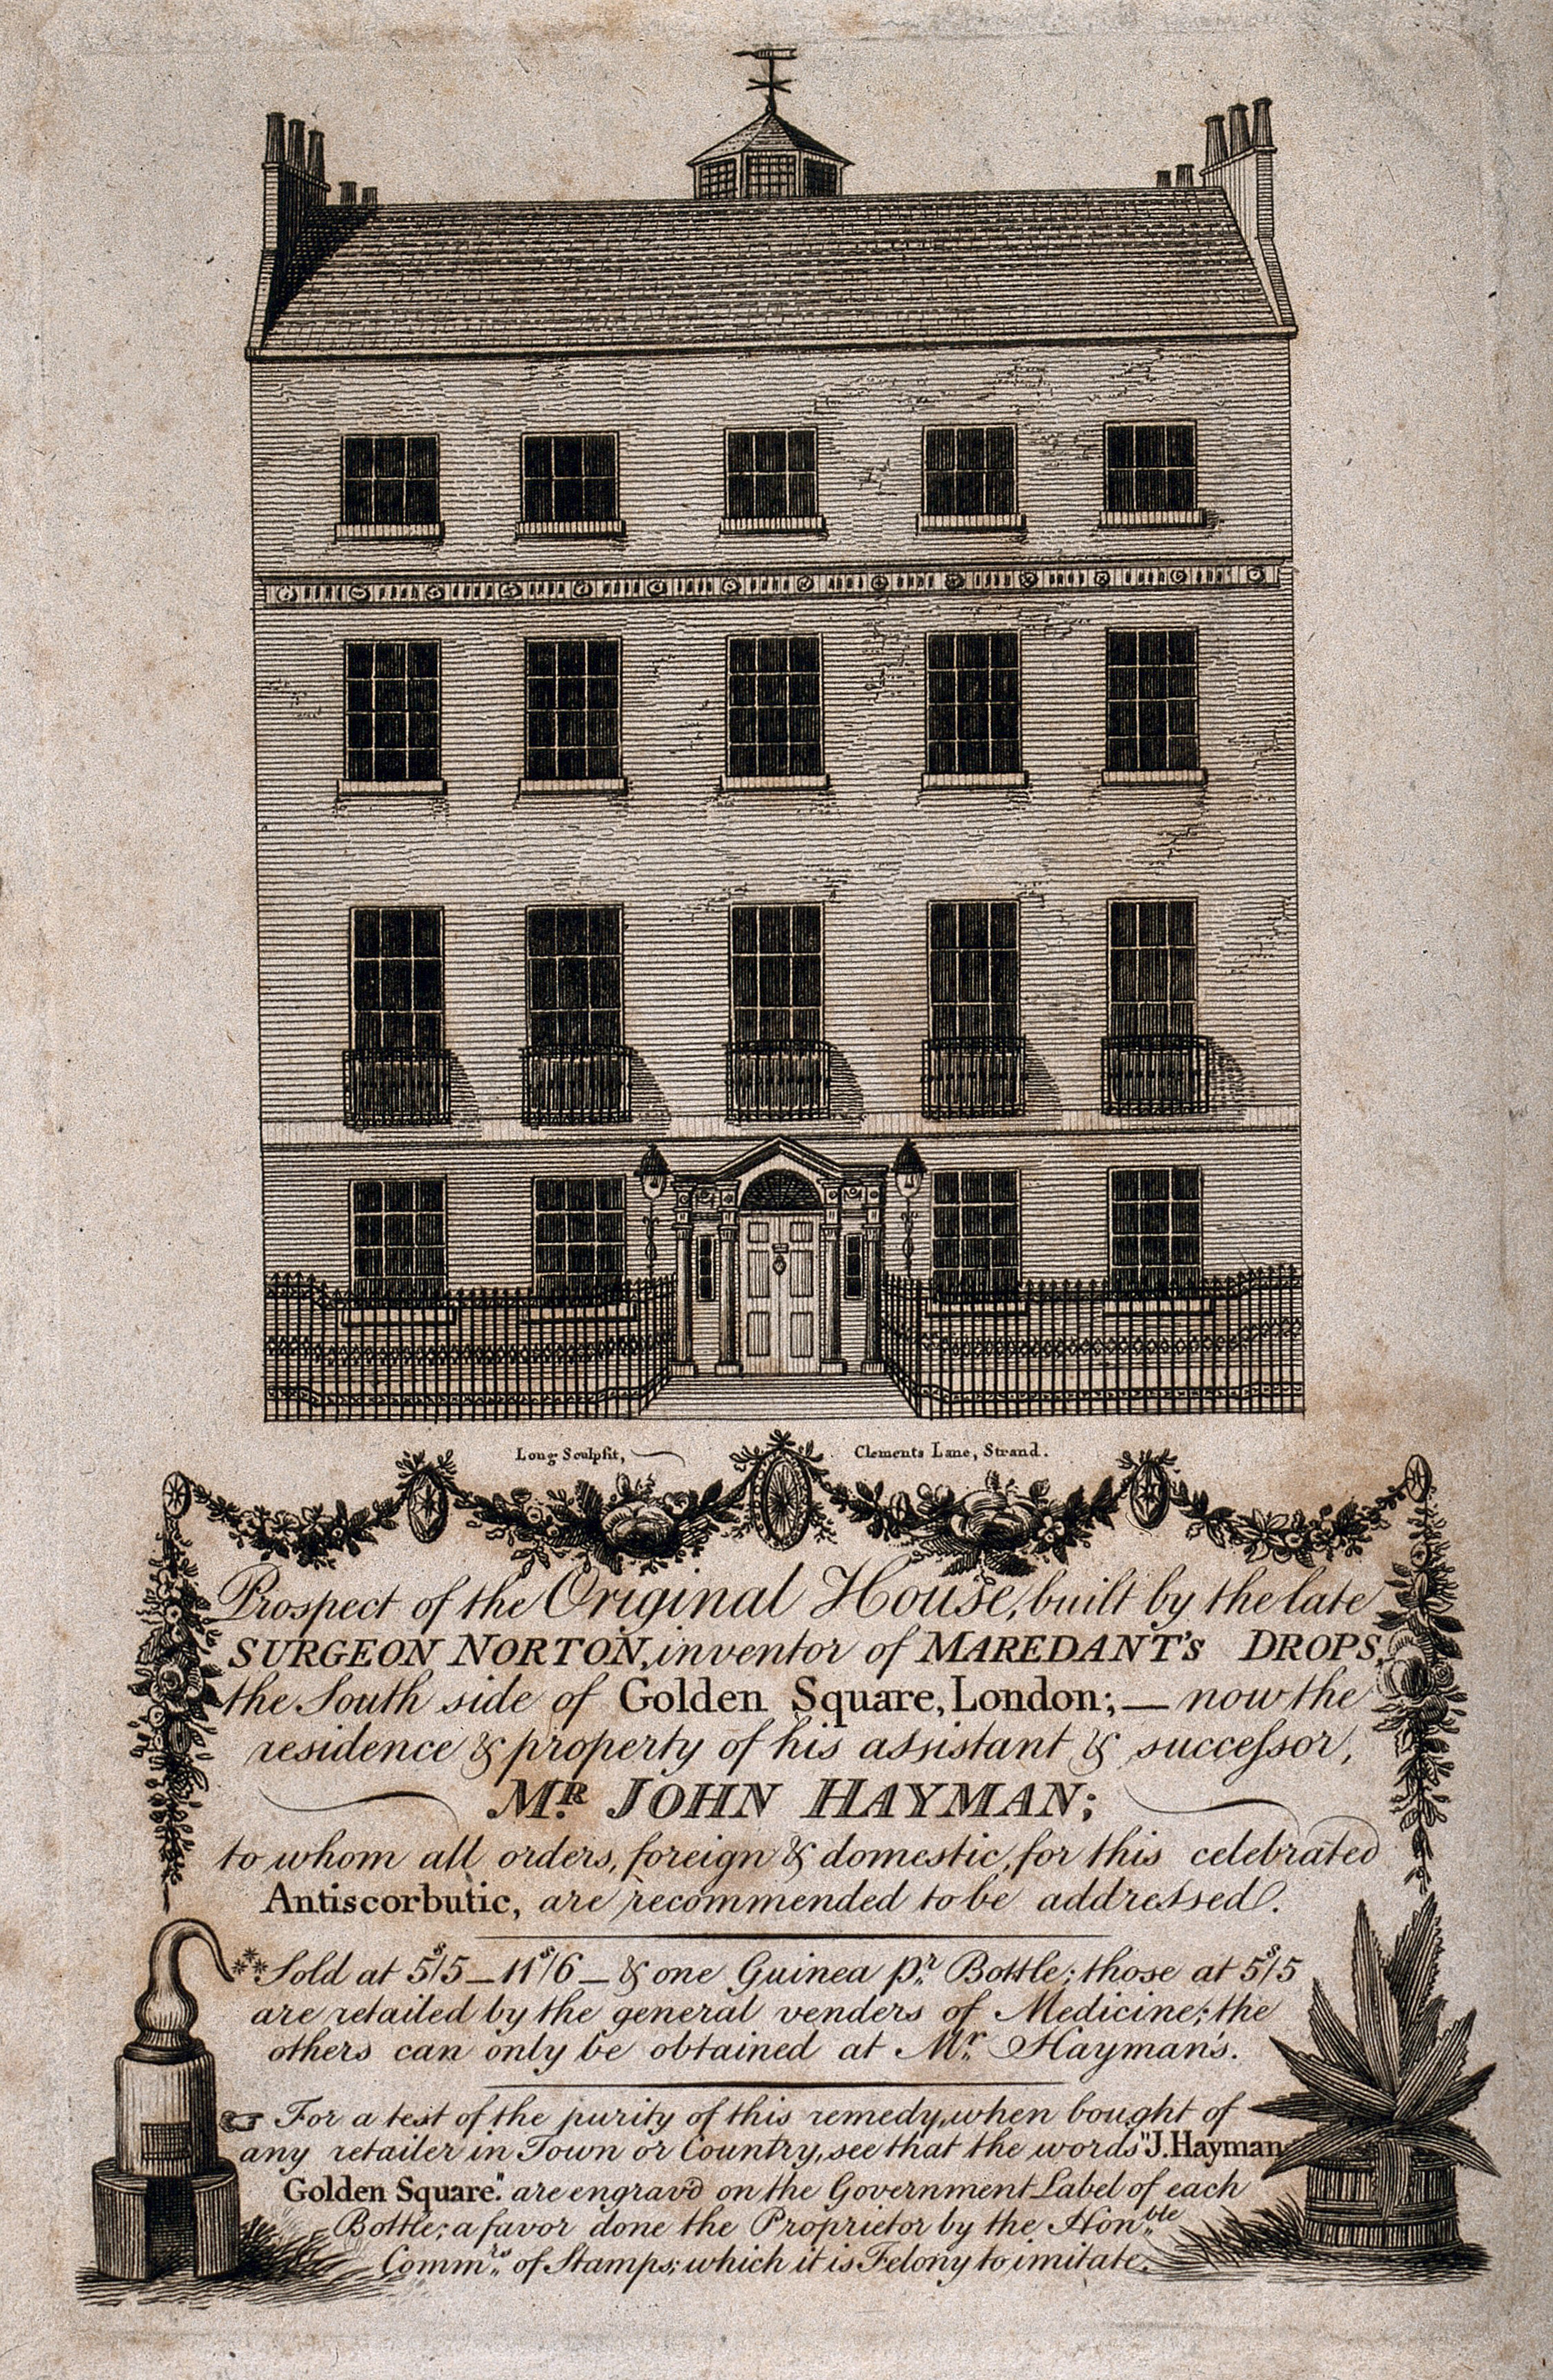 Surgeon John Norton's House, Golden Square, London, (top) and an advertisement for "his assistant & successor" John Hayman. Engraving by Long, 1786.